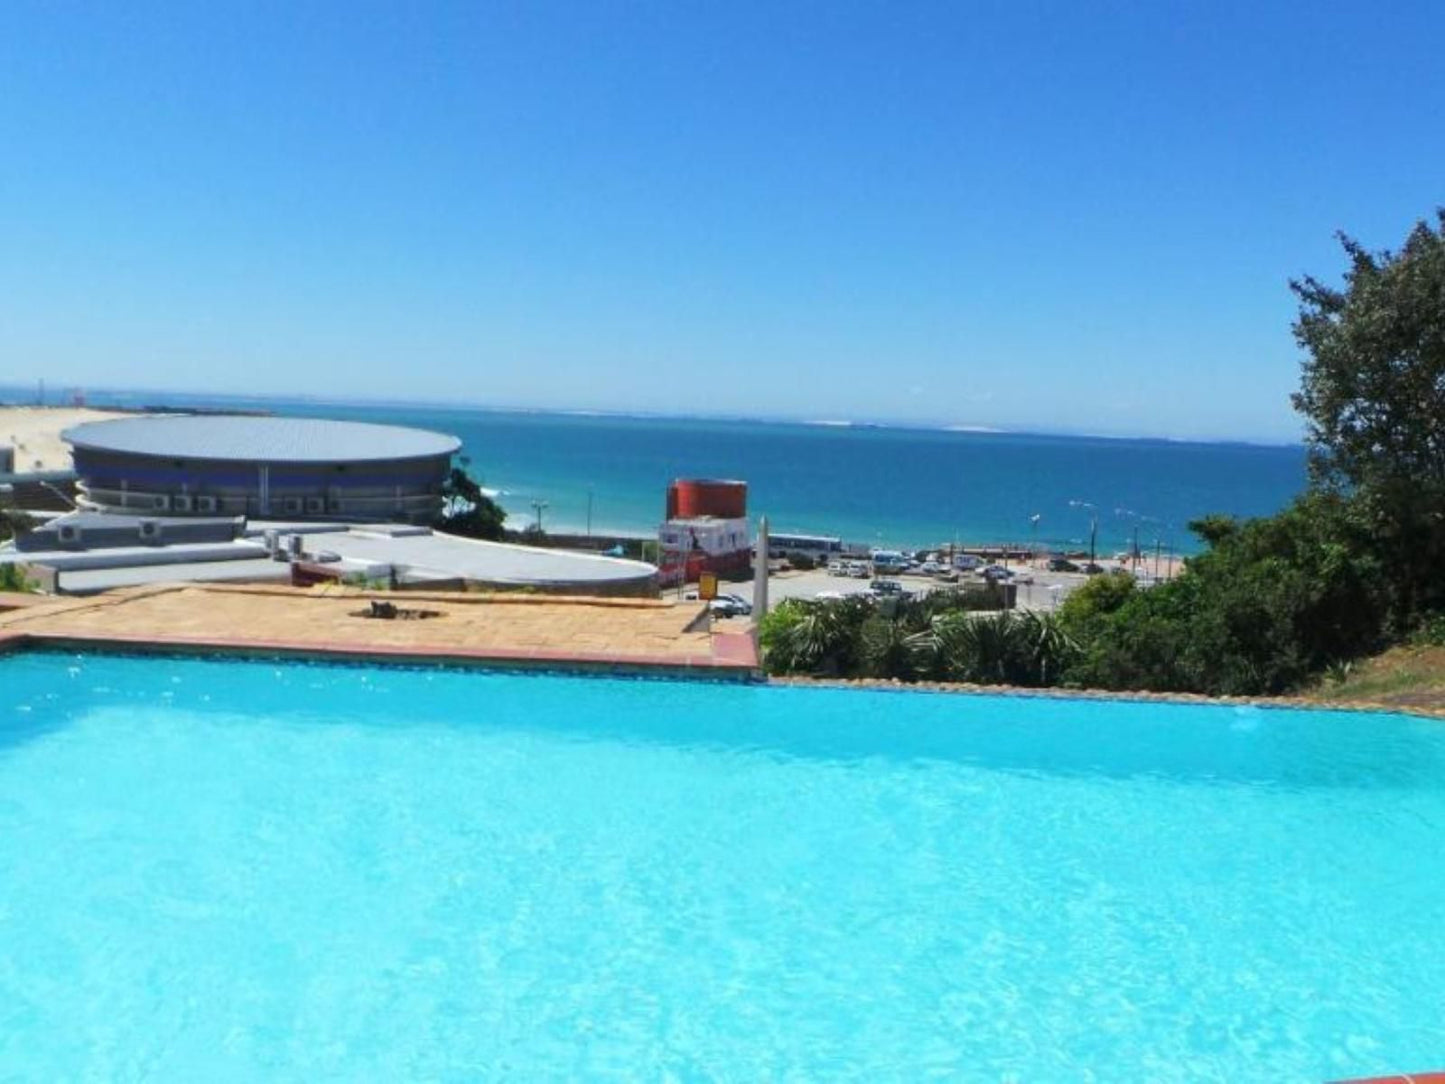 Chapman Hotel And Conference Centre Humewood Port Elizabeth Eastern Cape South Africa Colorful, Beach, Nature, Sand, Swimming Pool